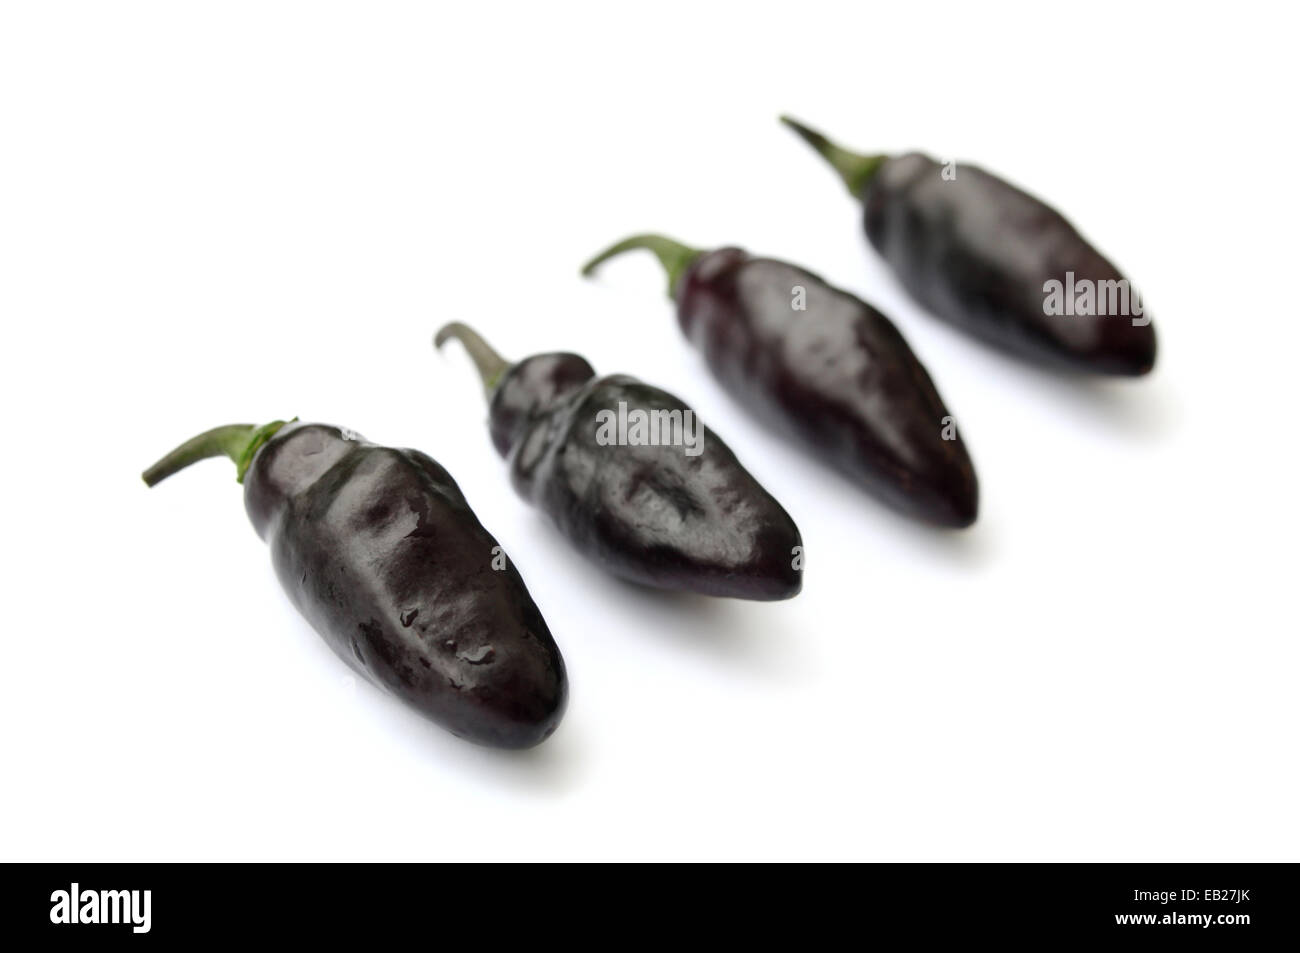 Black chillies known as Pimenta de Neyde Chilies isolated on white background in this studio photography food photo. Four chillies in a diagonal row Stock Photo